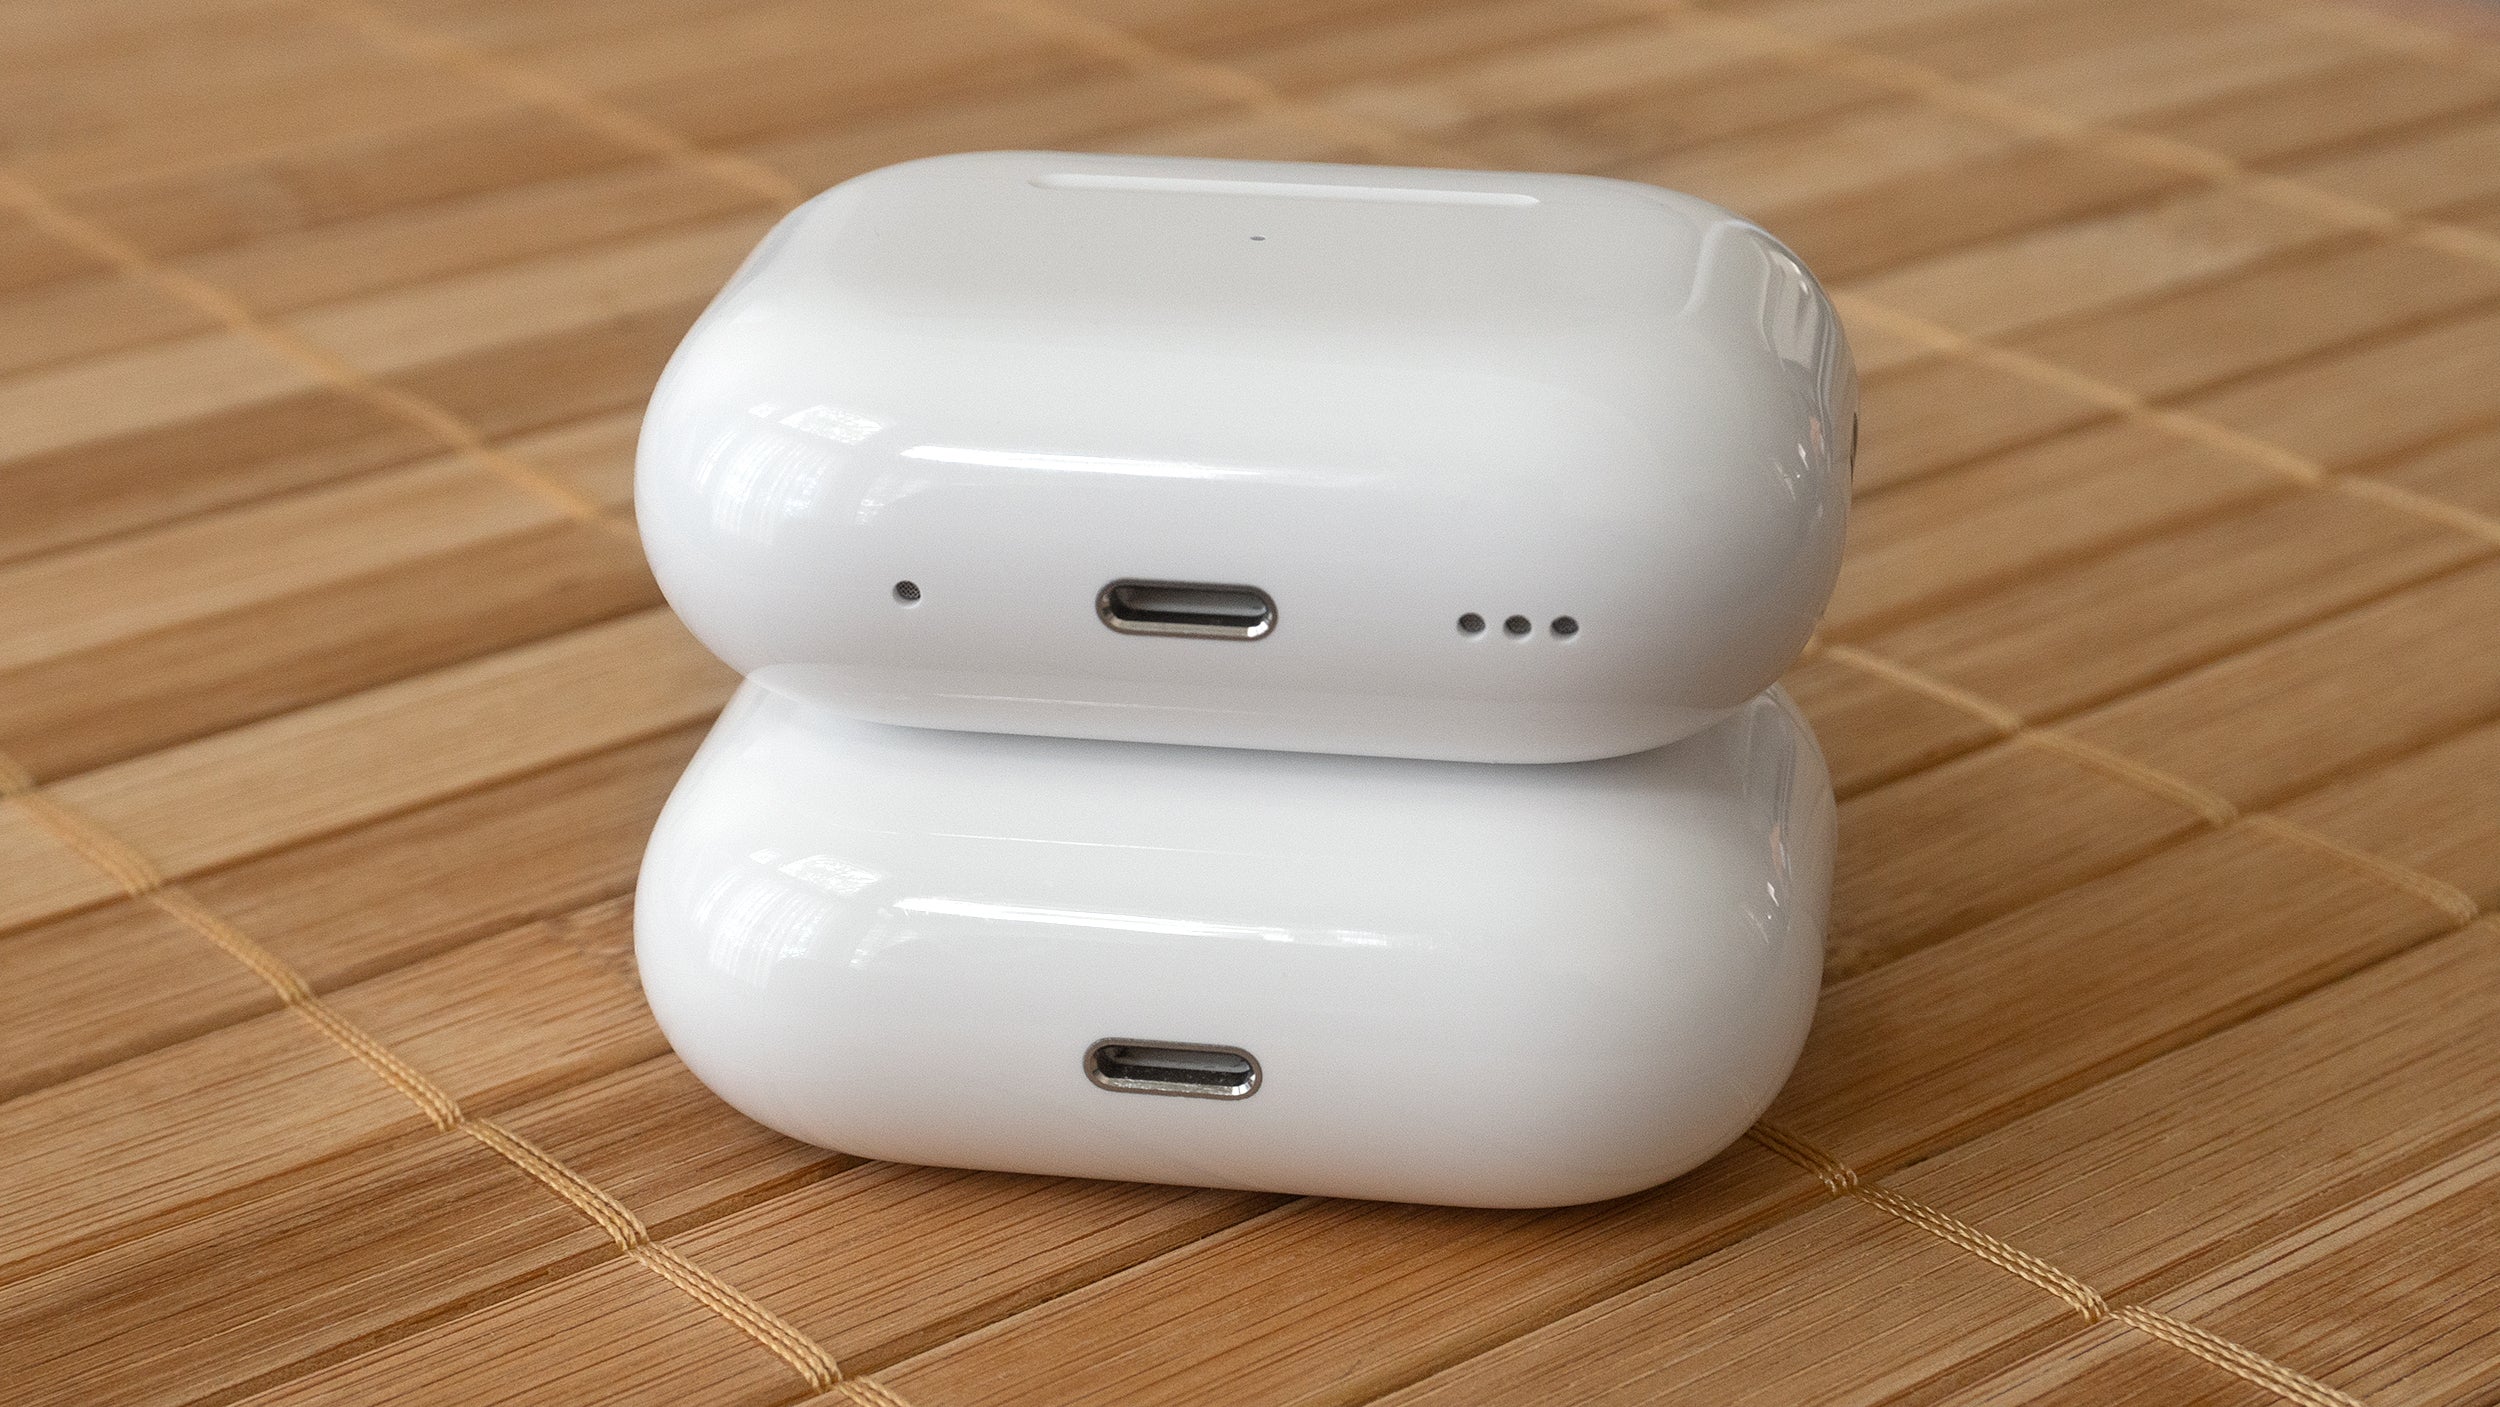 The original AirPods Pro charging case (bottom) compared to the 2nd Gen case (top). They are nearly identical although the new case adds speaker holes and a lanyard loop. (Photo: Andrew Liszewski | Gizmodo)